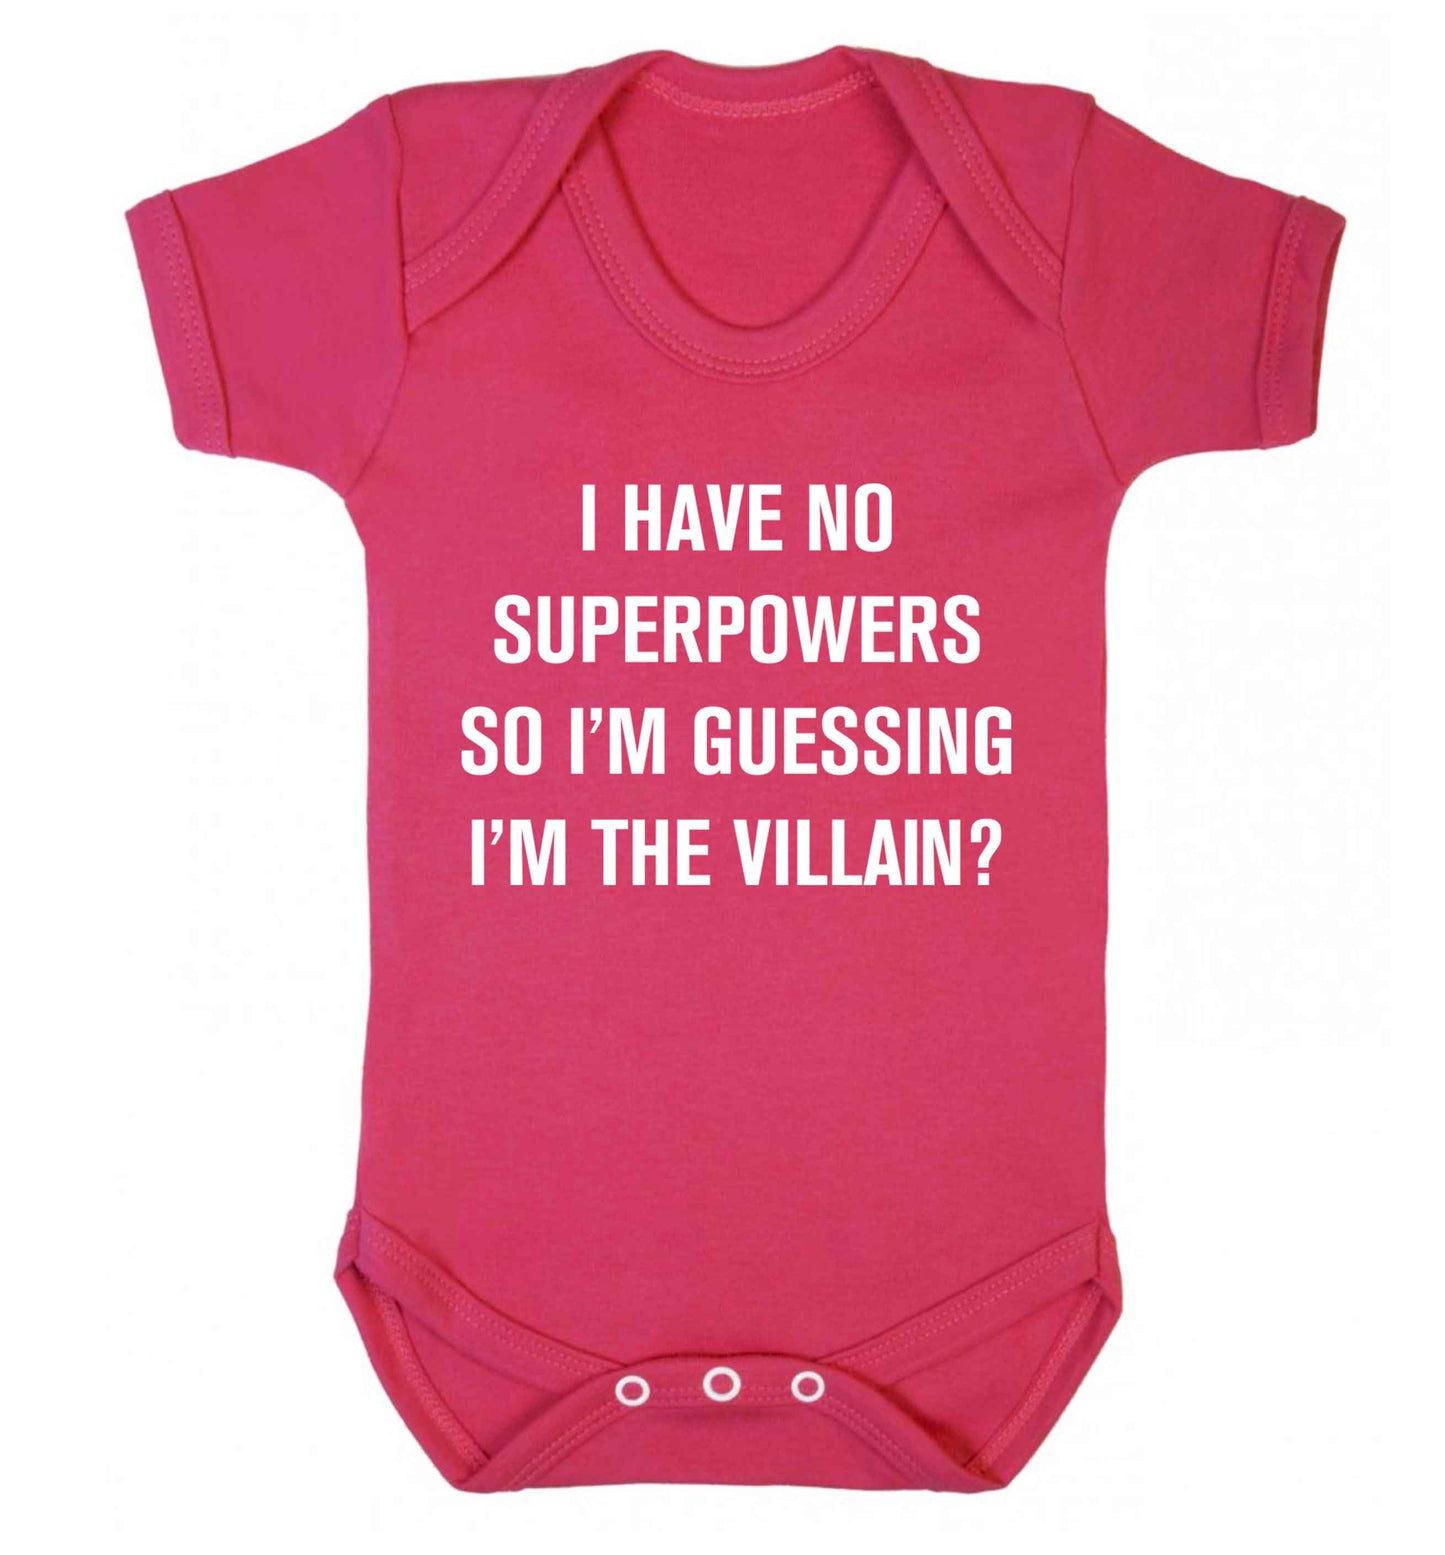 I have no superpowers so I'm guessing I'm the villain? Baby Vest dark pink 18-24 months